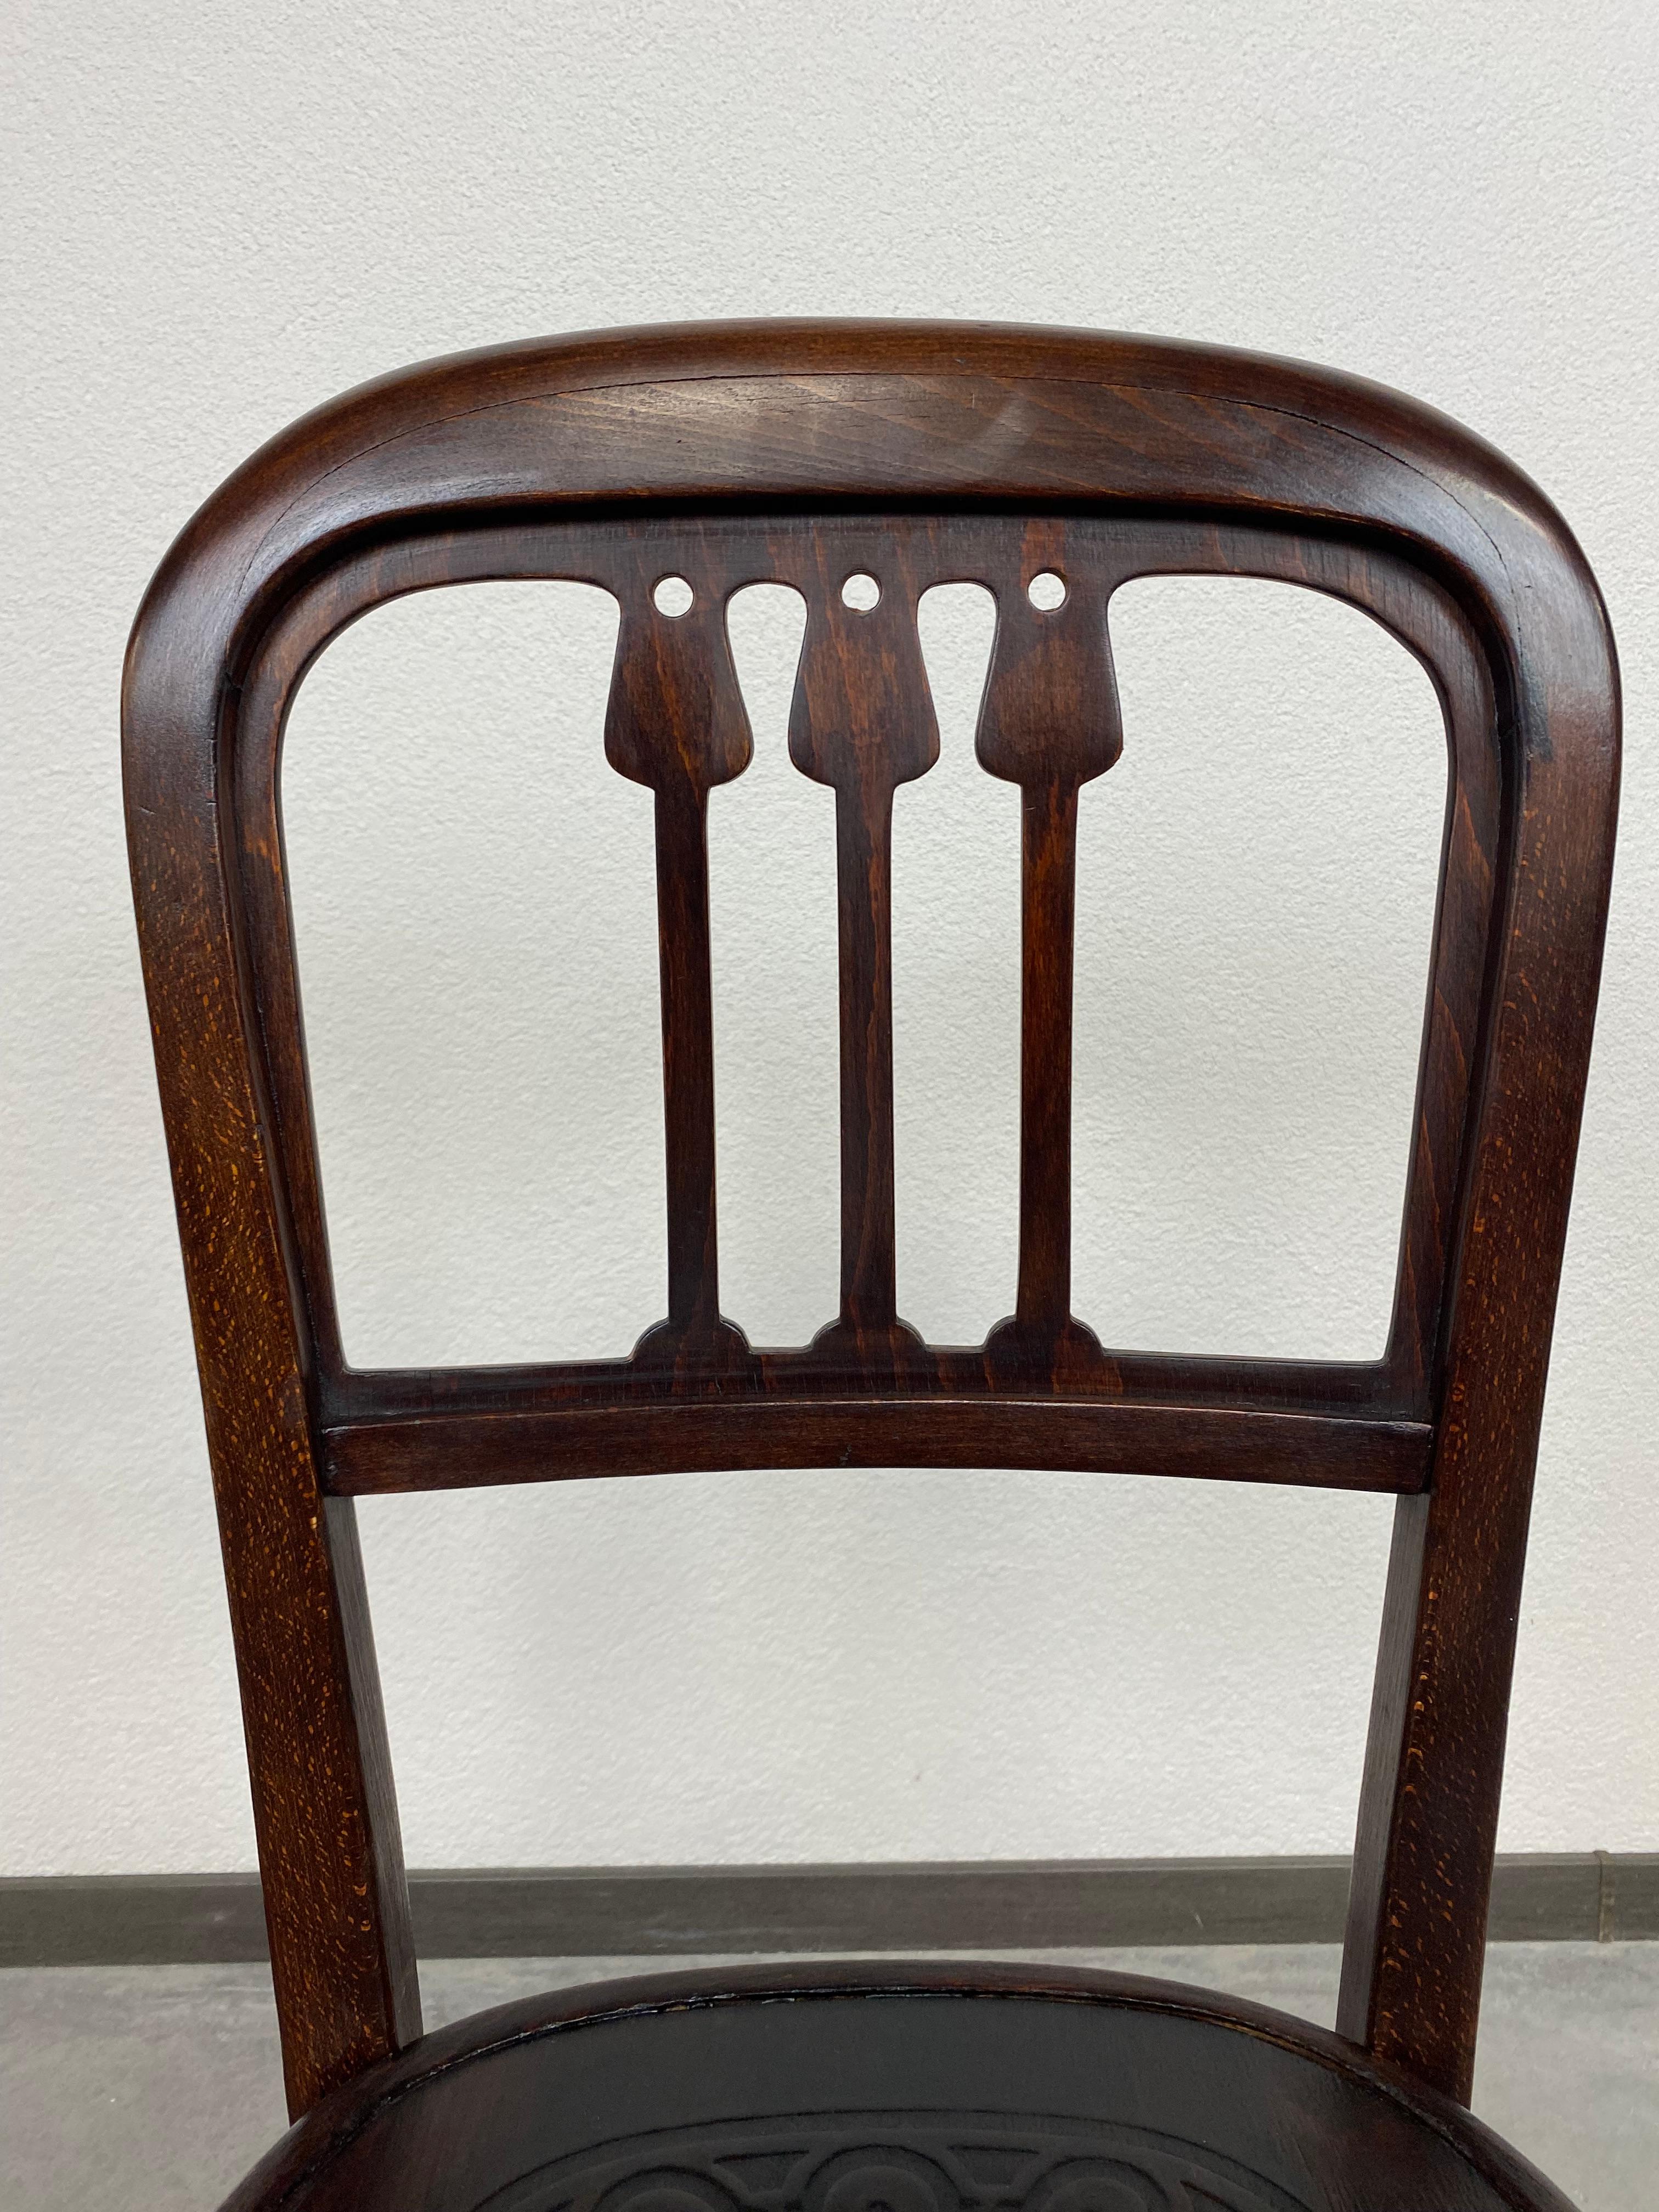 Vienna Secession Secession Dining Chair No.493 by J&J Kohn For Sale